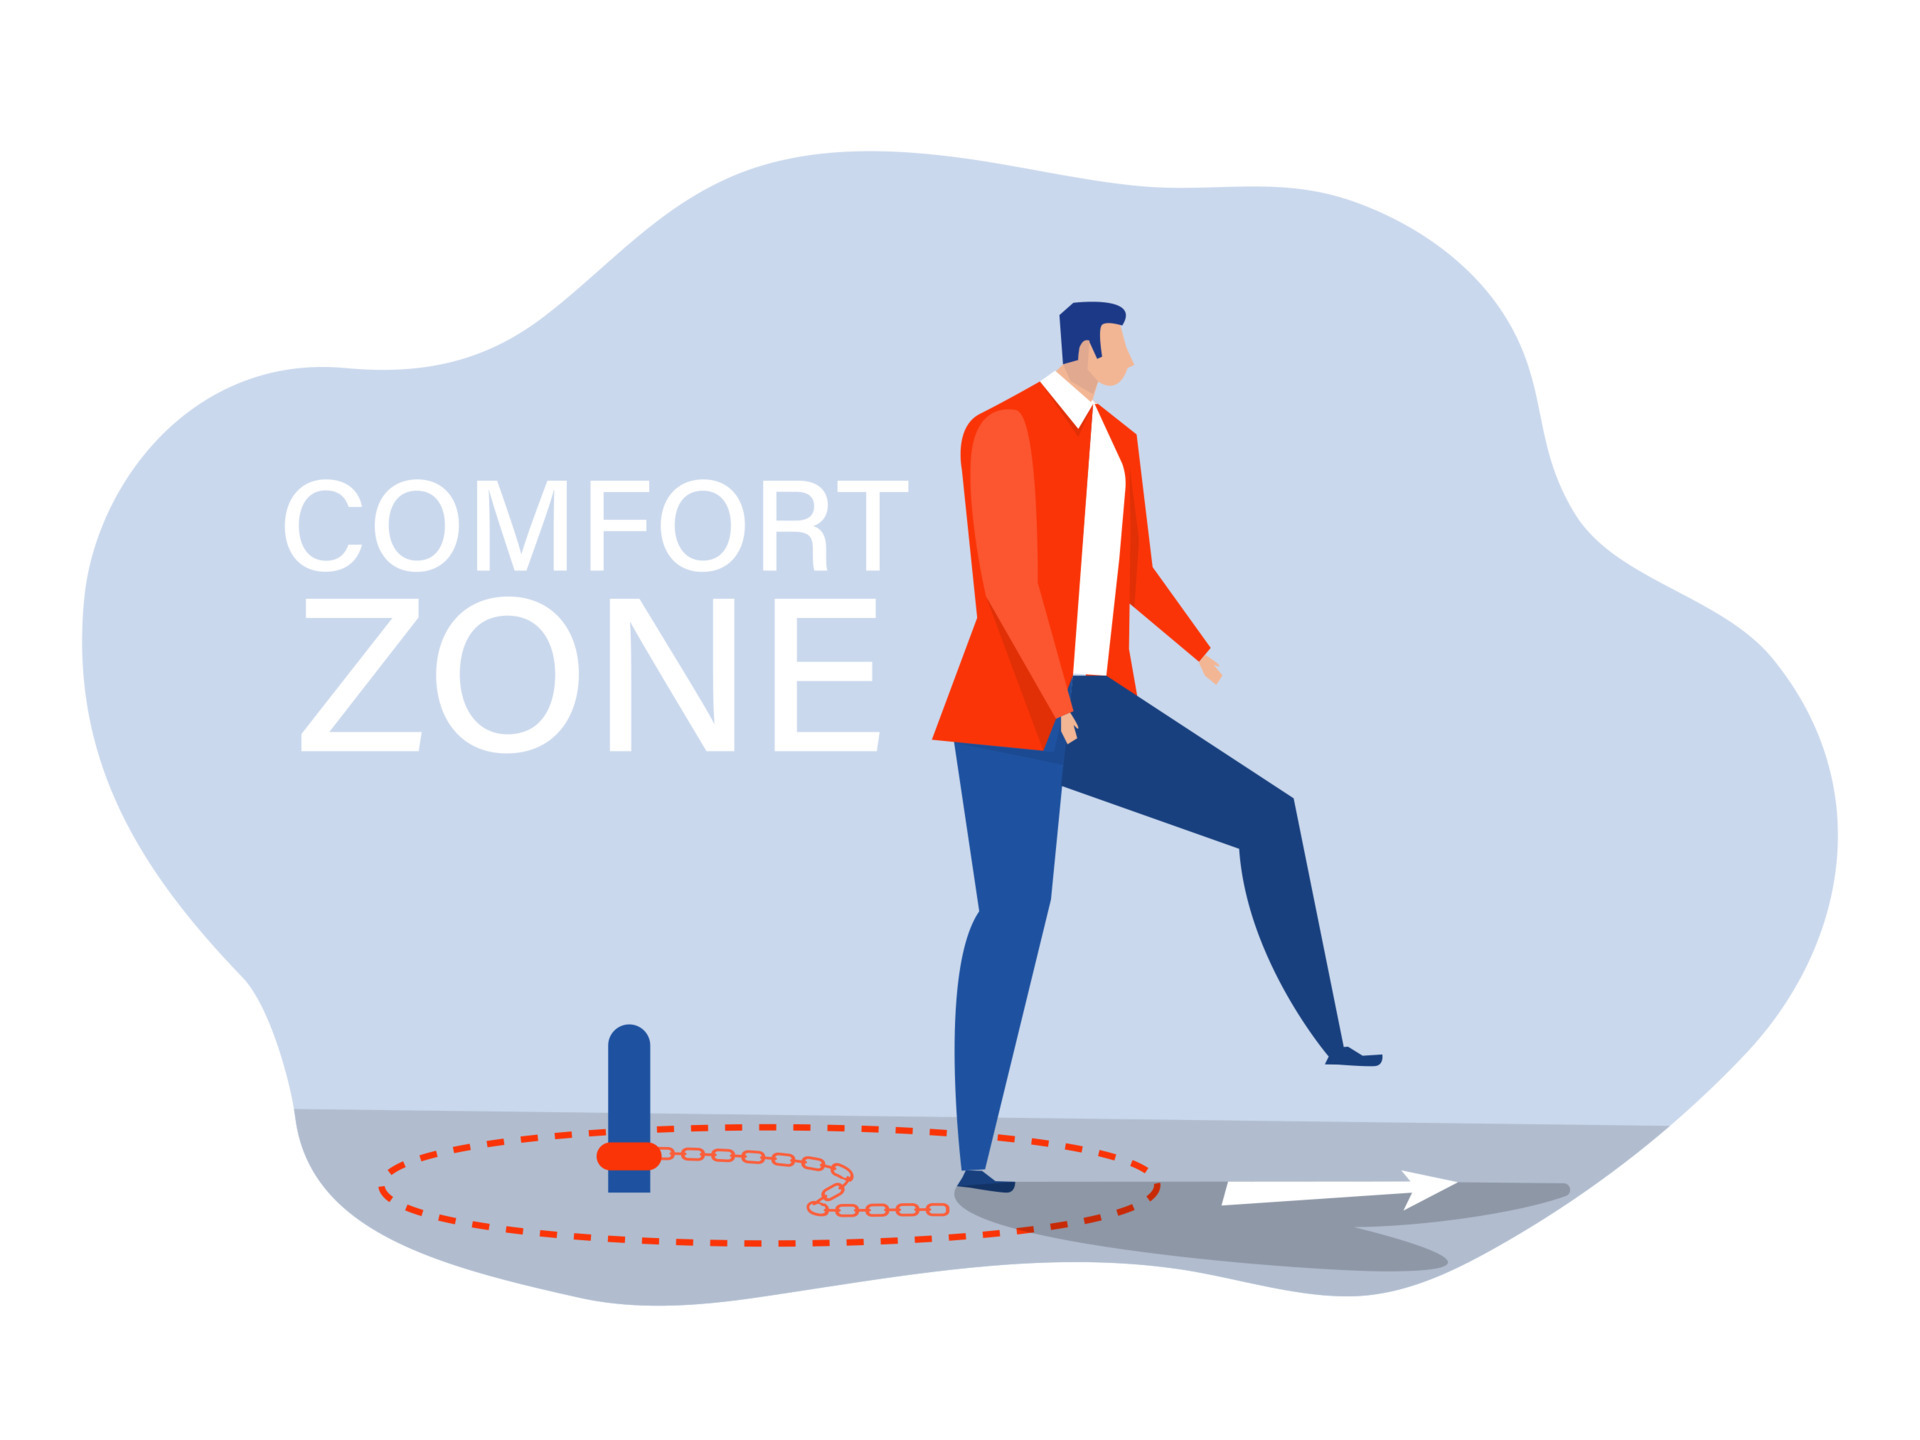 https://static.vecteezy.com/system/resources/previews/004/646/499/original/businessman-step-out-of-comfort-circle-for-freedom-for-new-success-comfort-zone-concept-vector.jpg